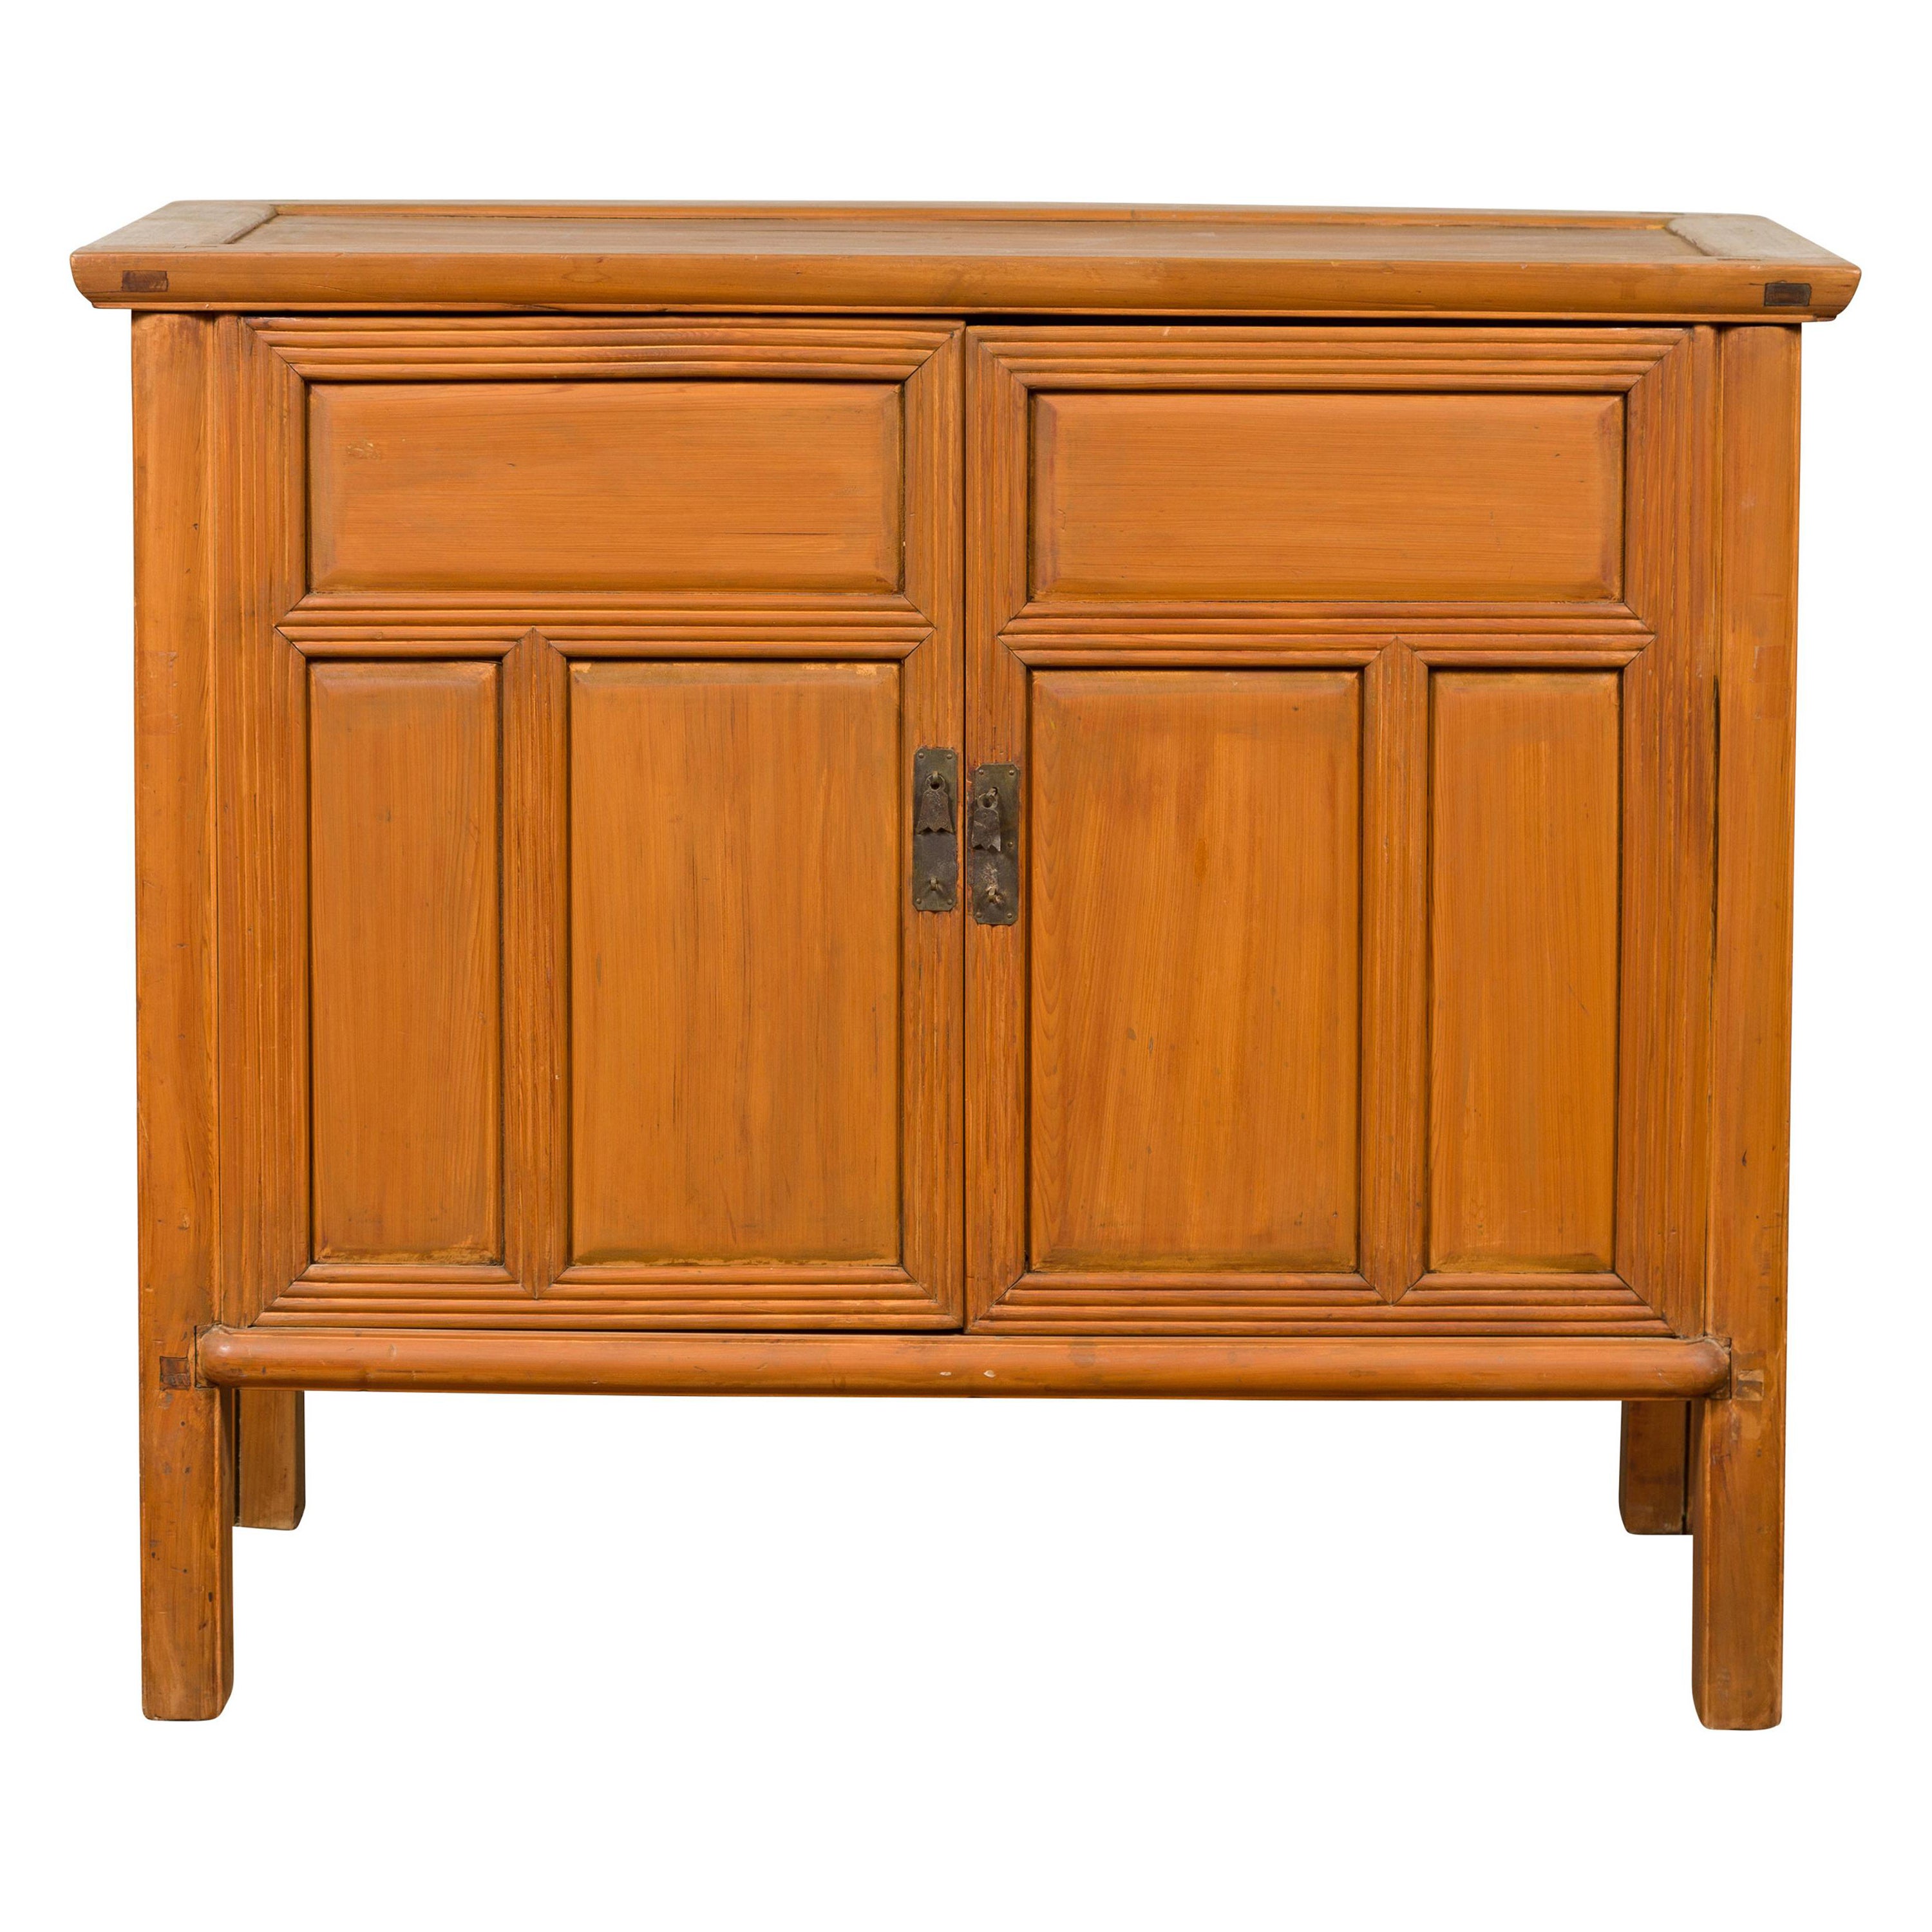 Vintage Chinese Buffet with Paneled Doors, Hidden Drawers and Natural Patina